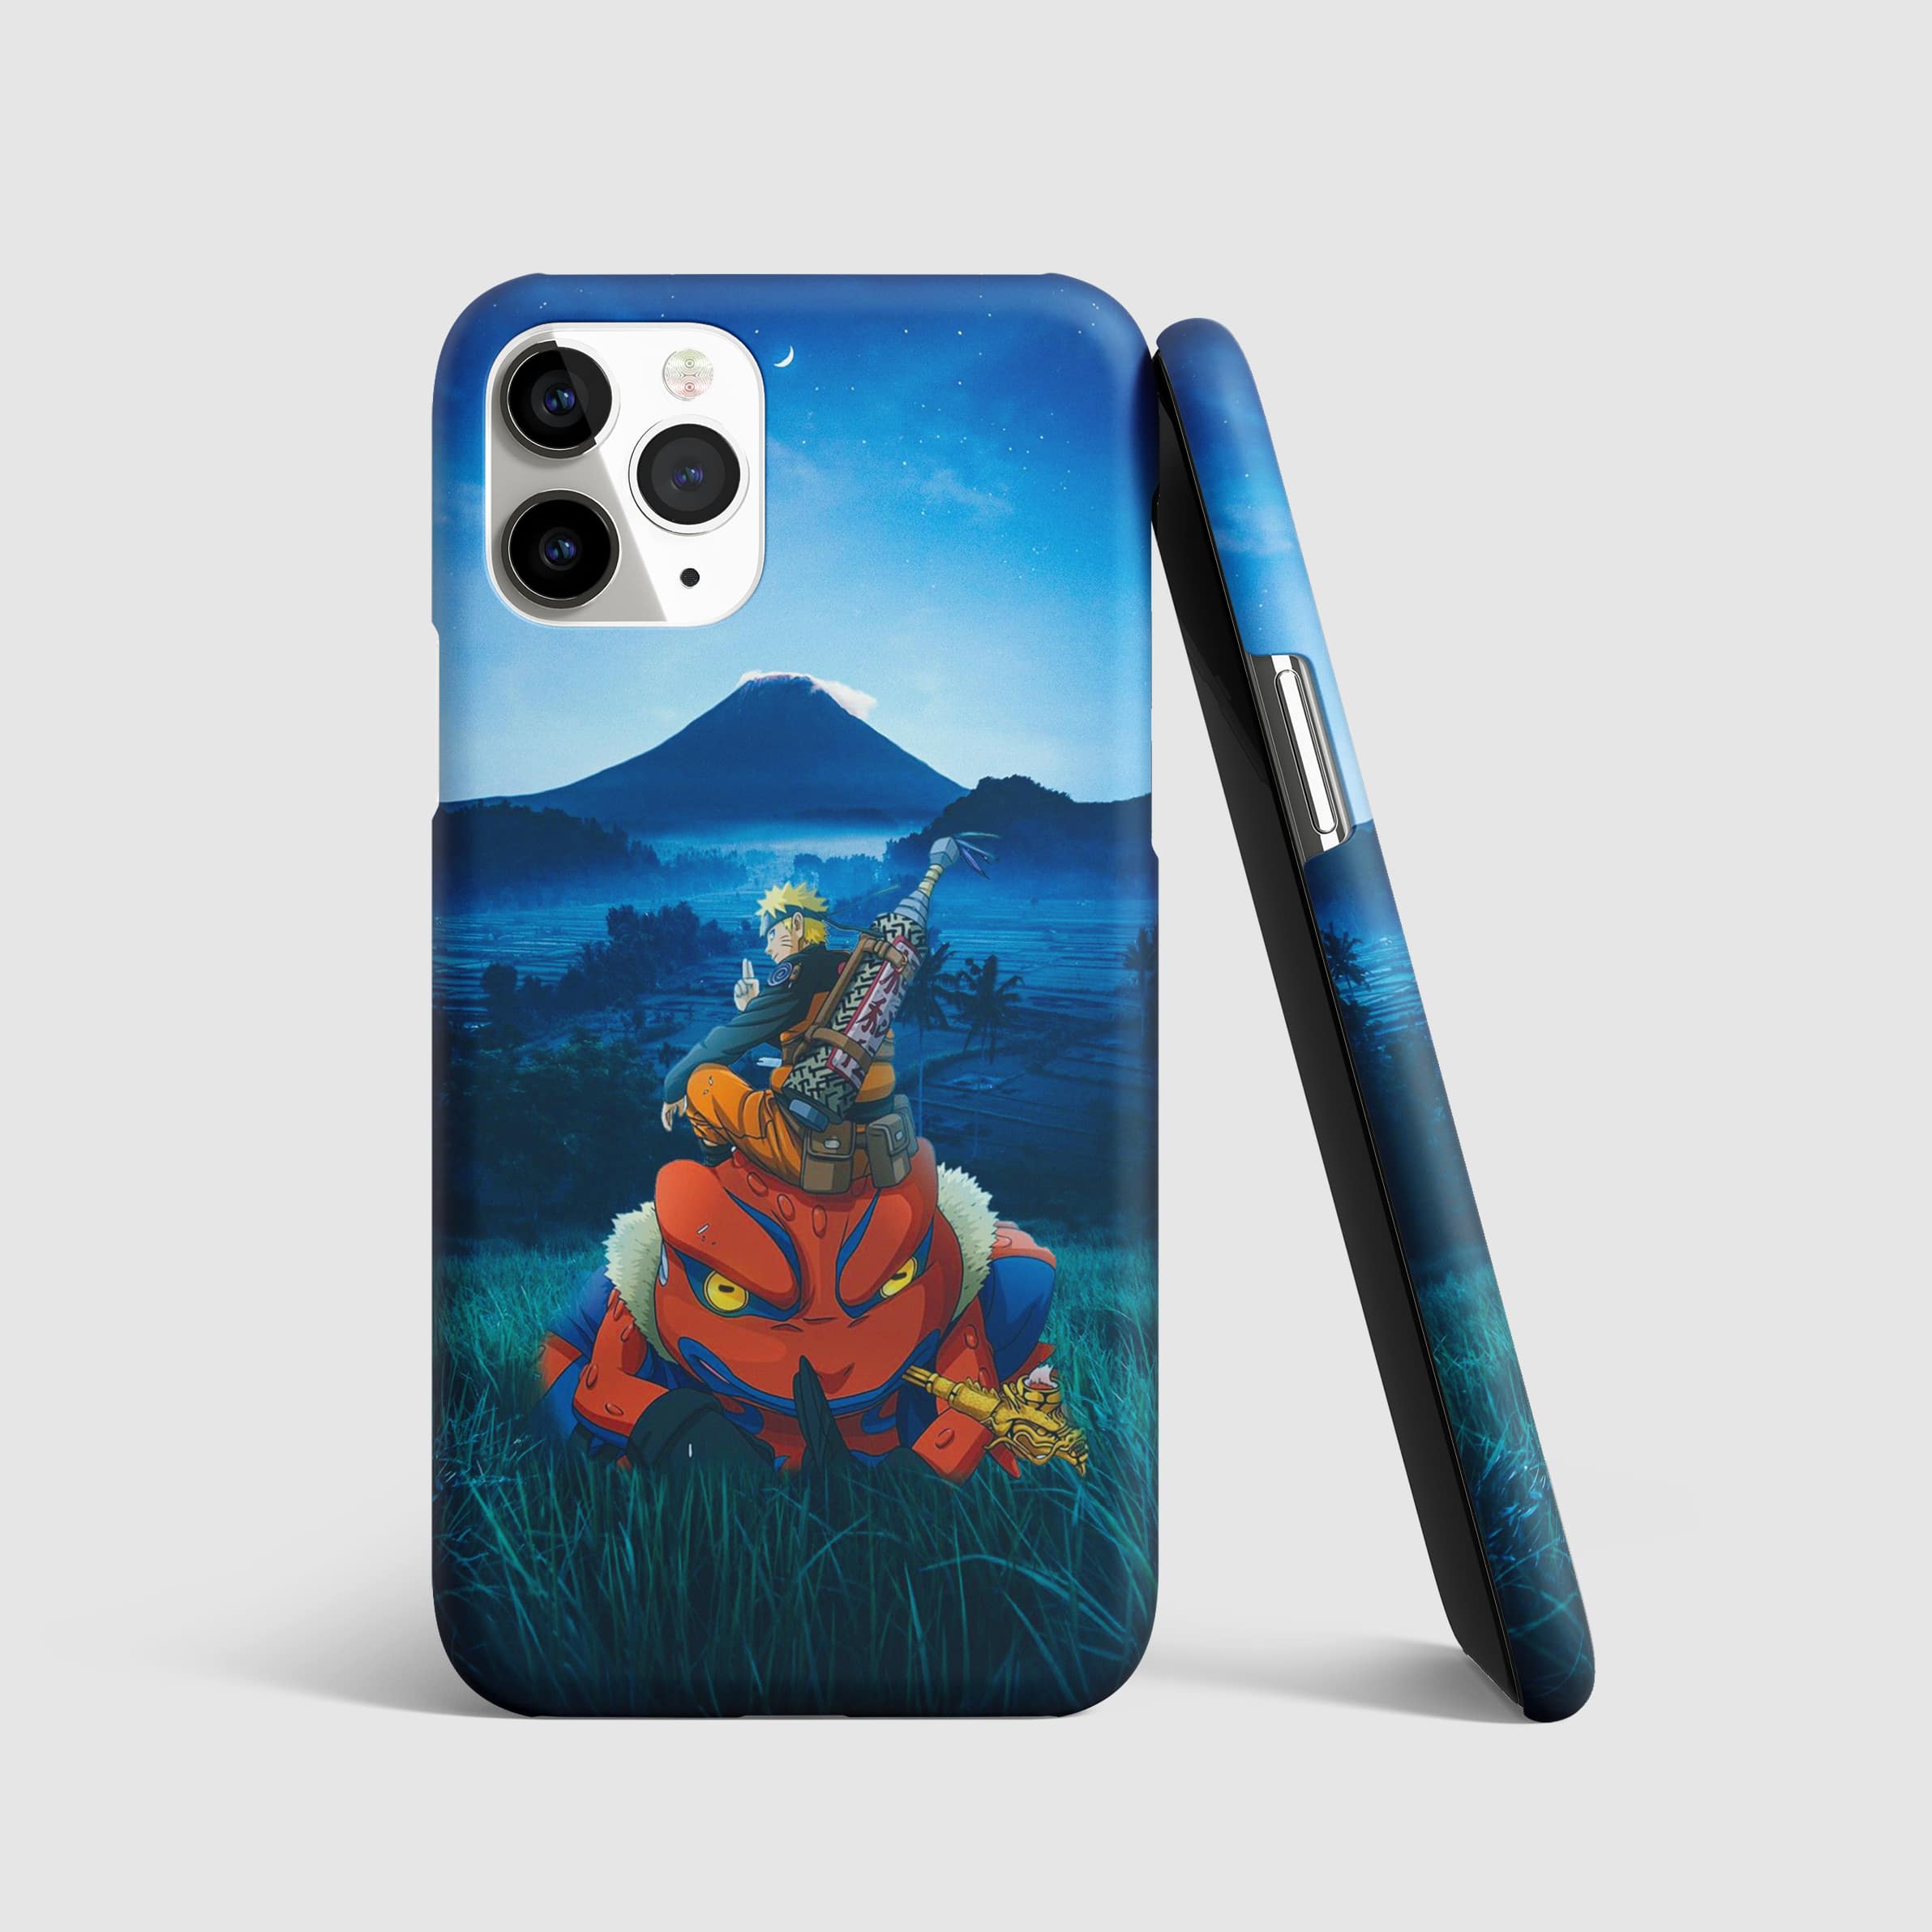 Gamabunta Toad Phone Cover with 3D matte finish, featuring the iconic Gamabunta design.